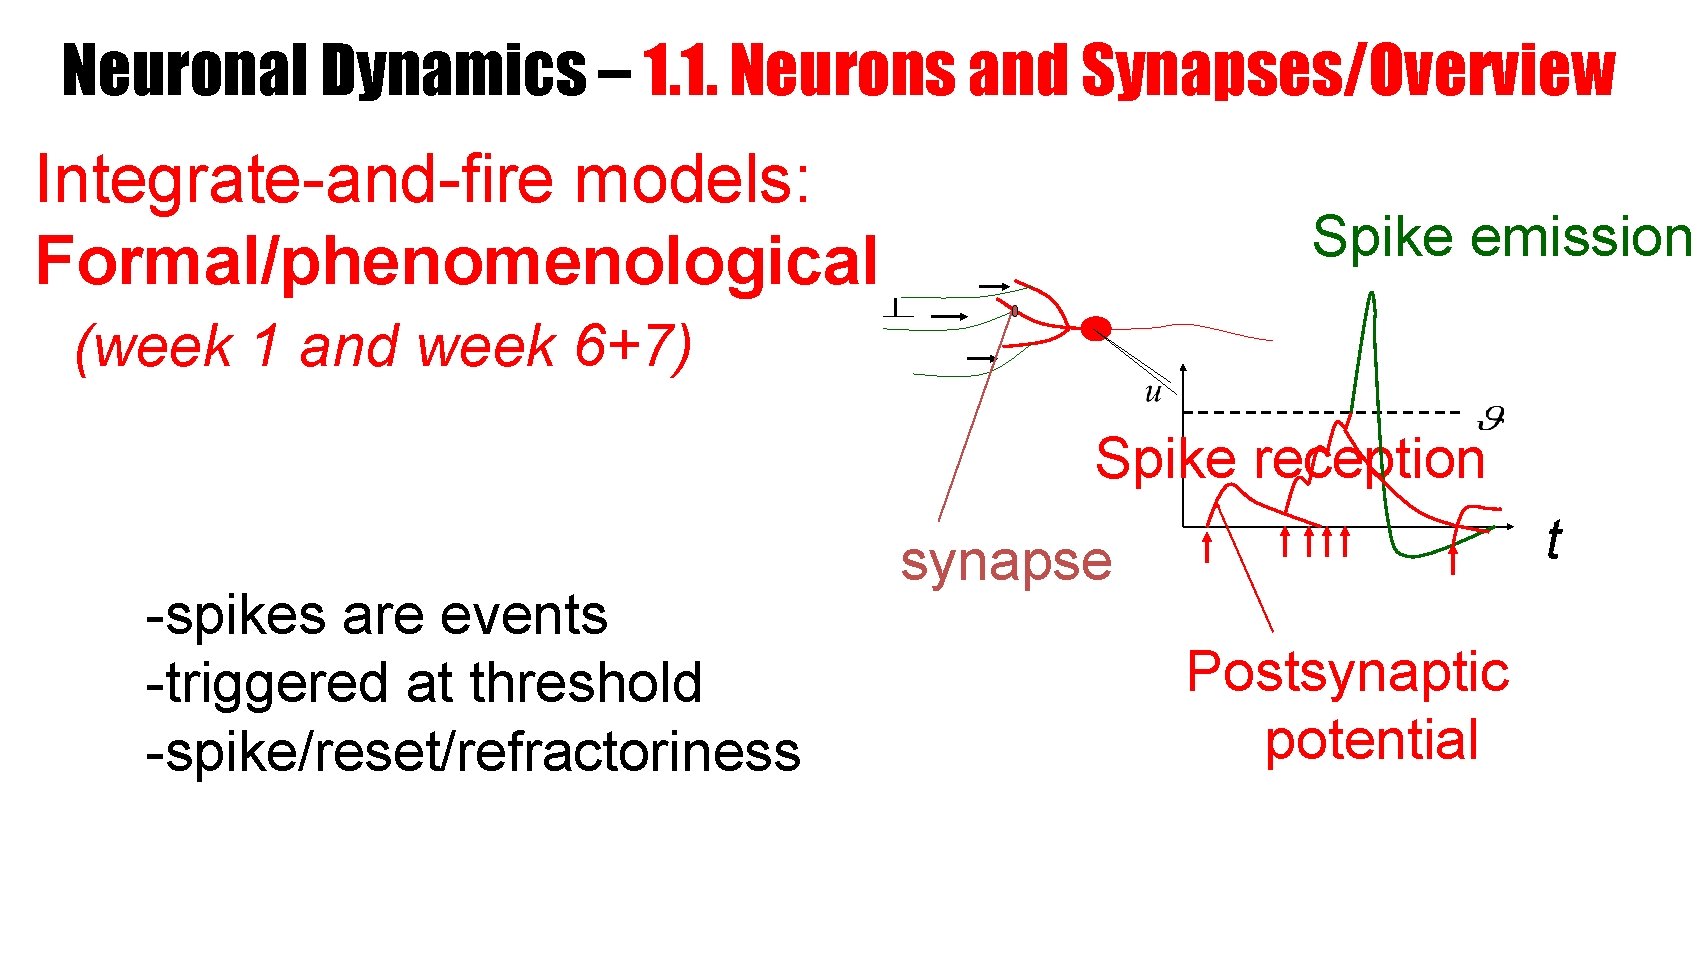 Neuronal Dynamics – 1. 1. Neurons and Synapses/Overview Integrate-and-fire models: Formal/phenomenological Spike emission (week